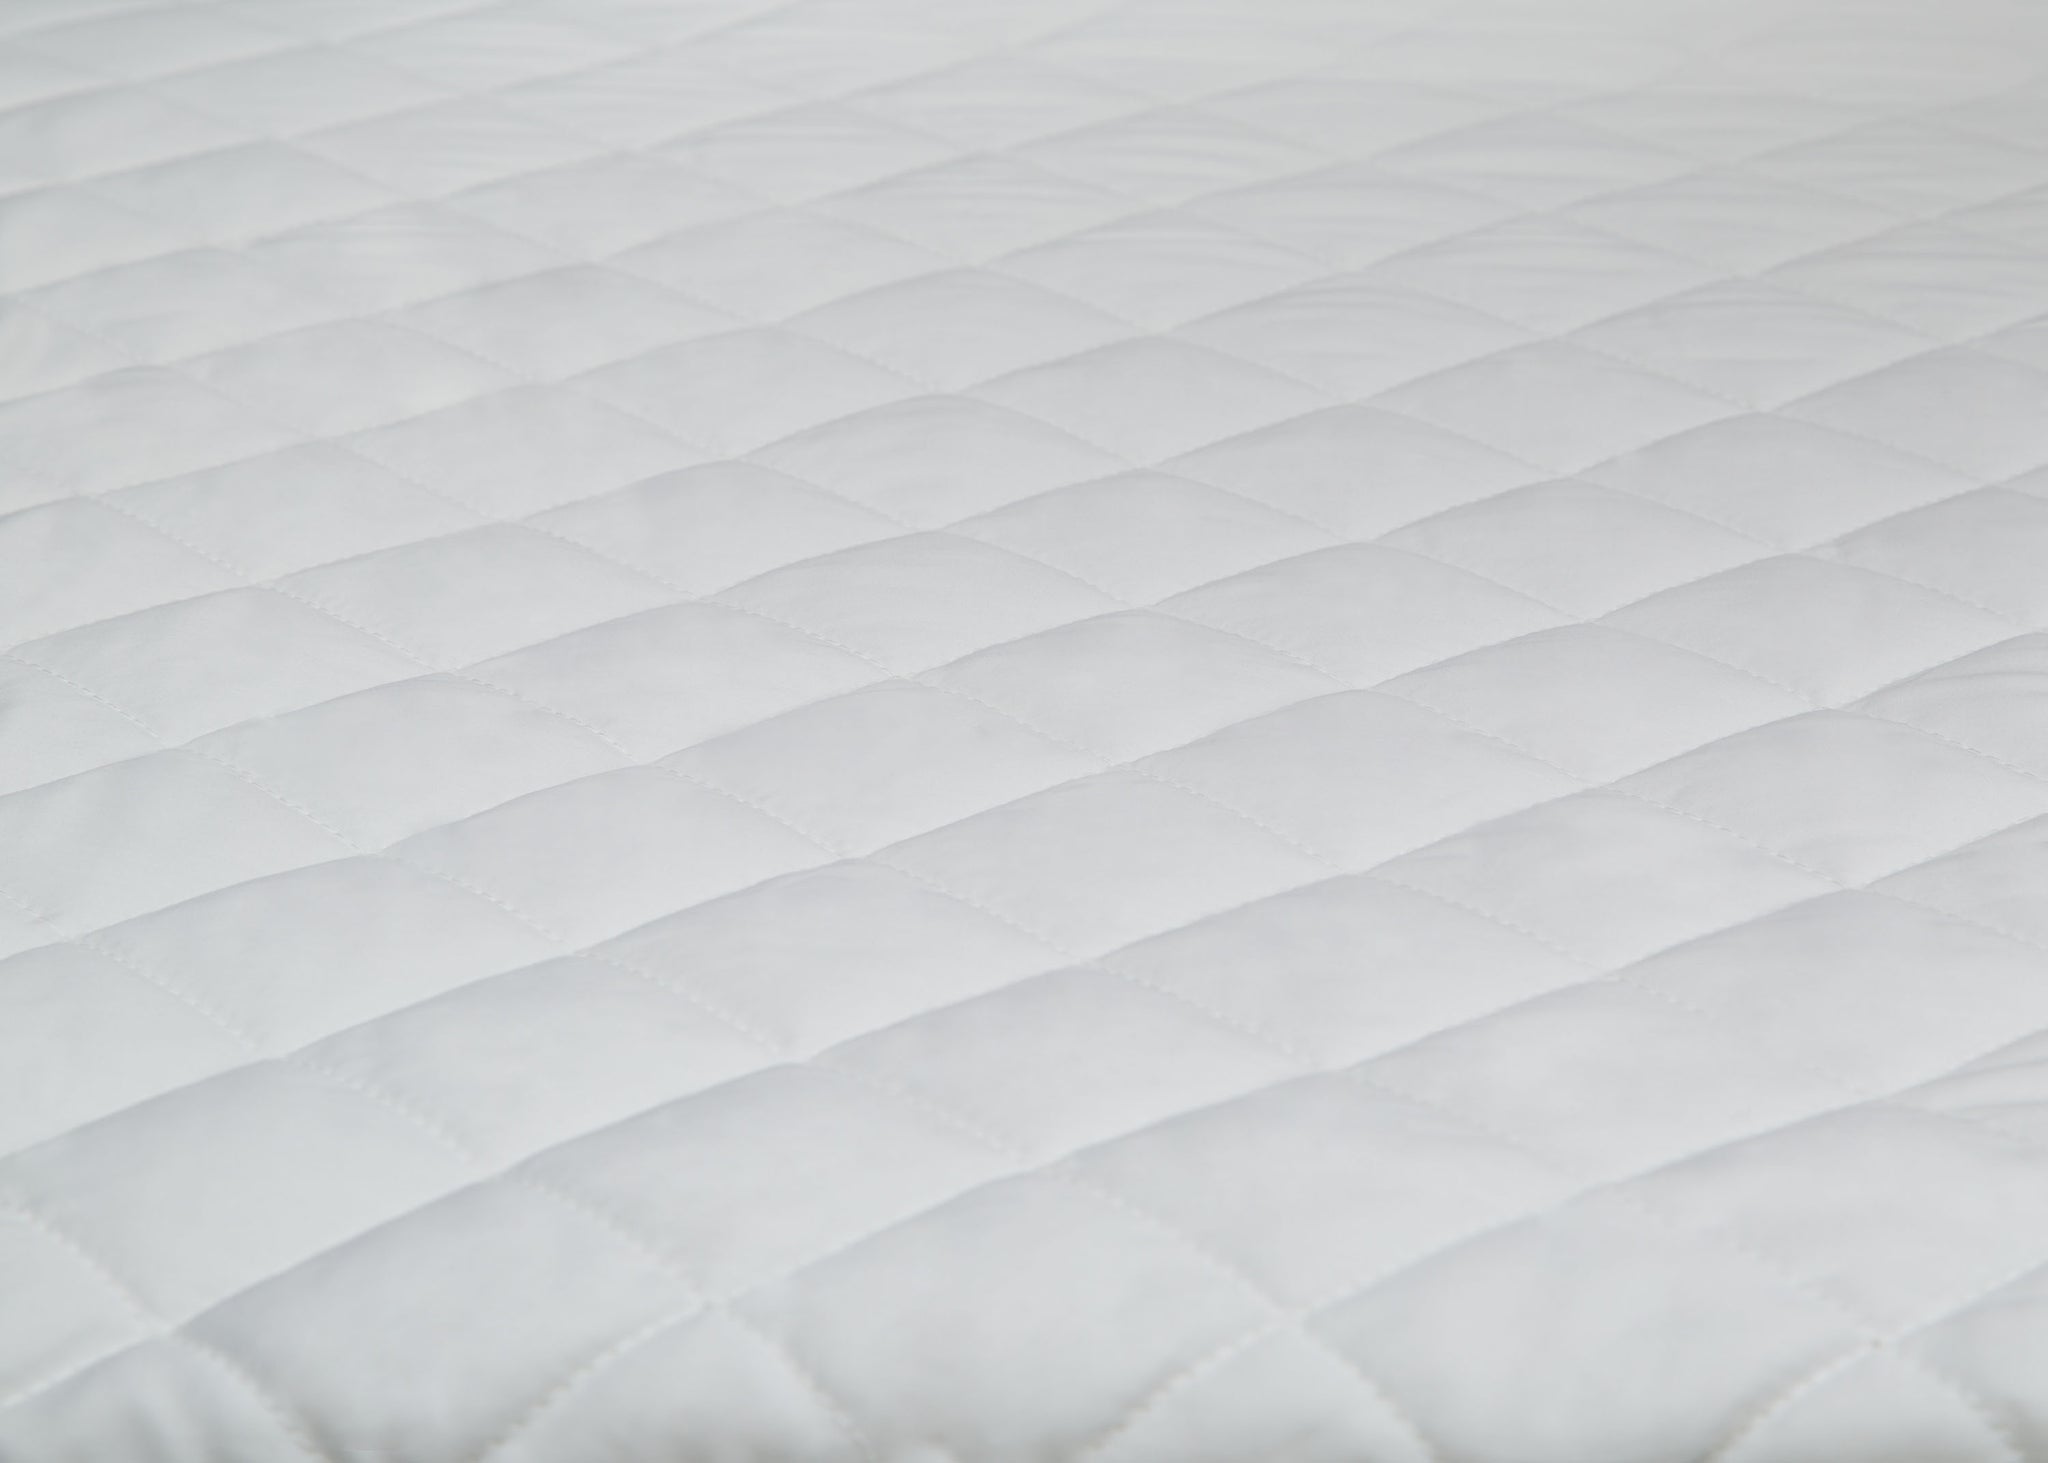 fitted mattress pad cover